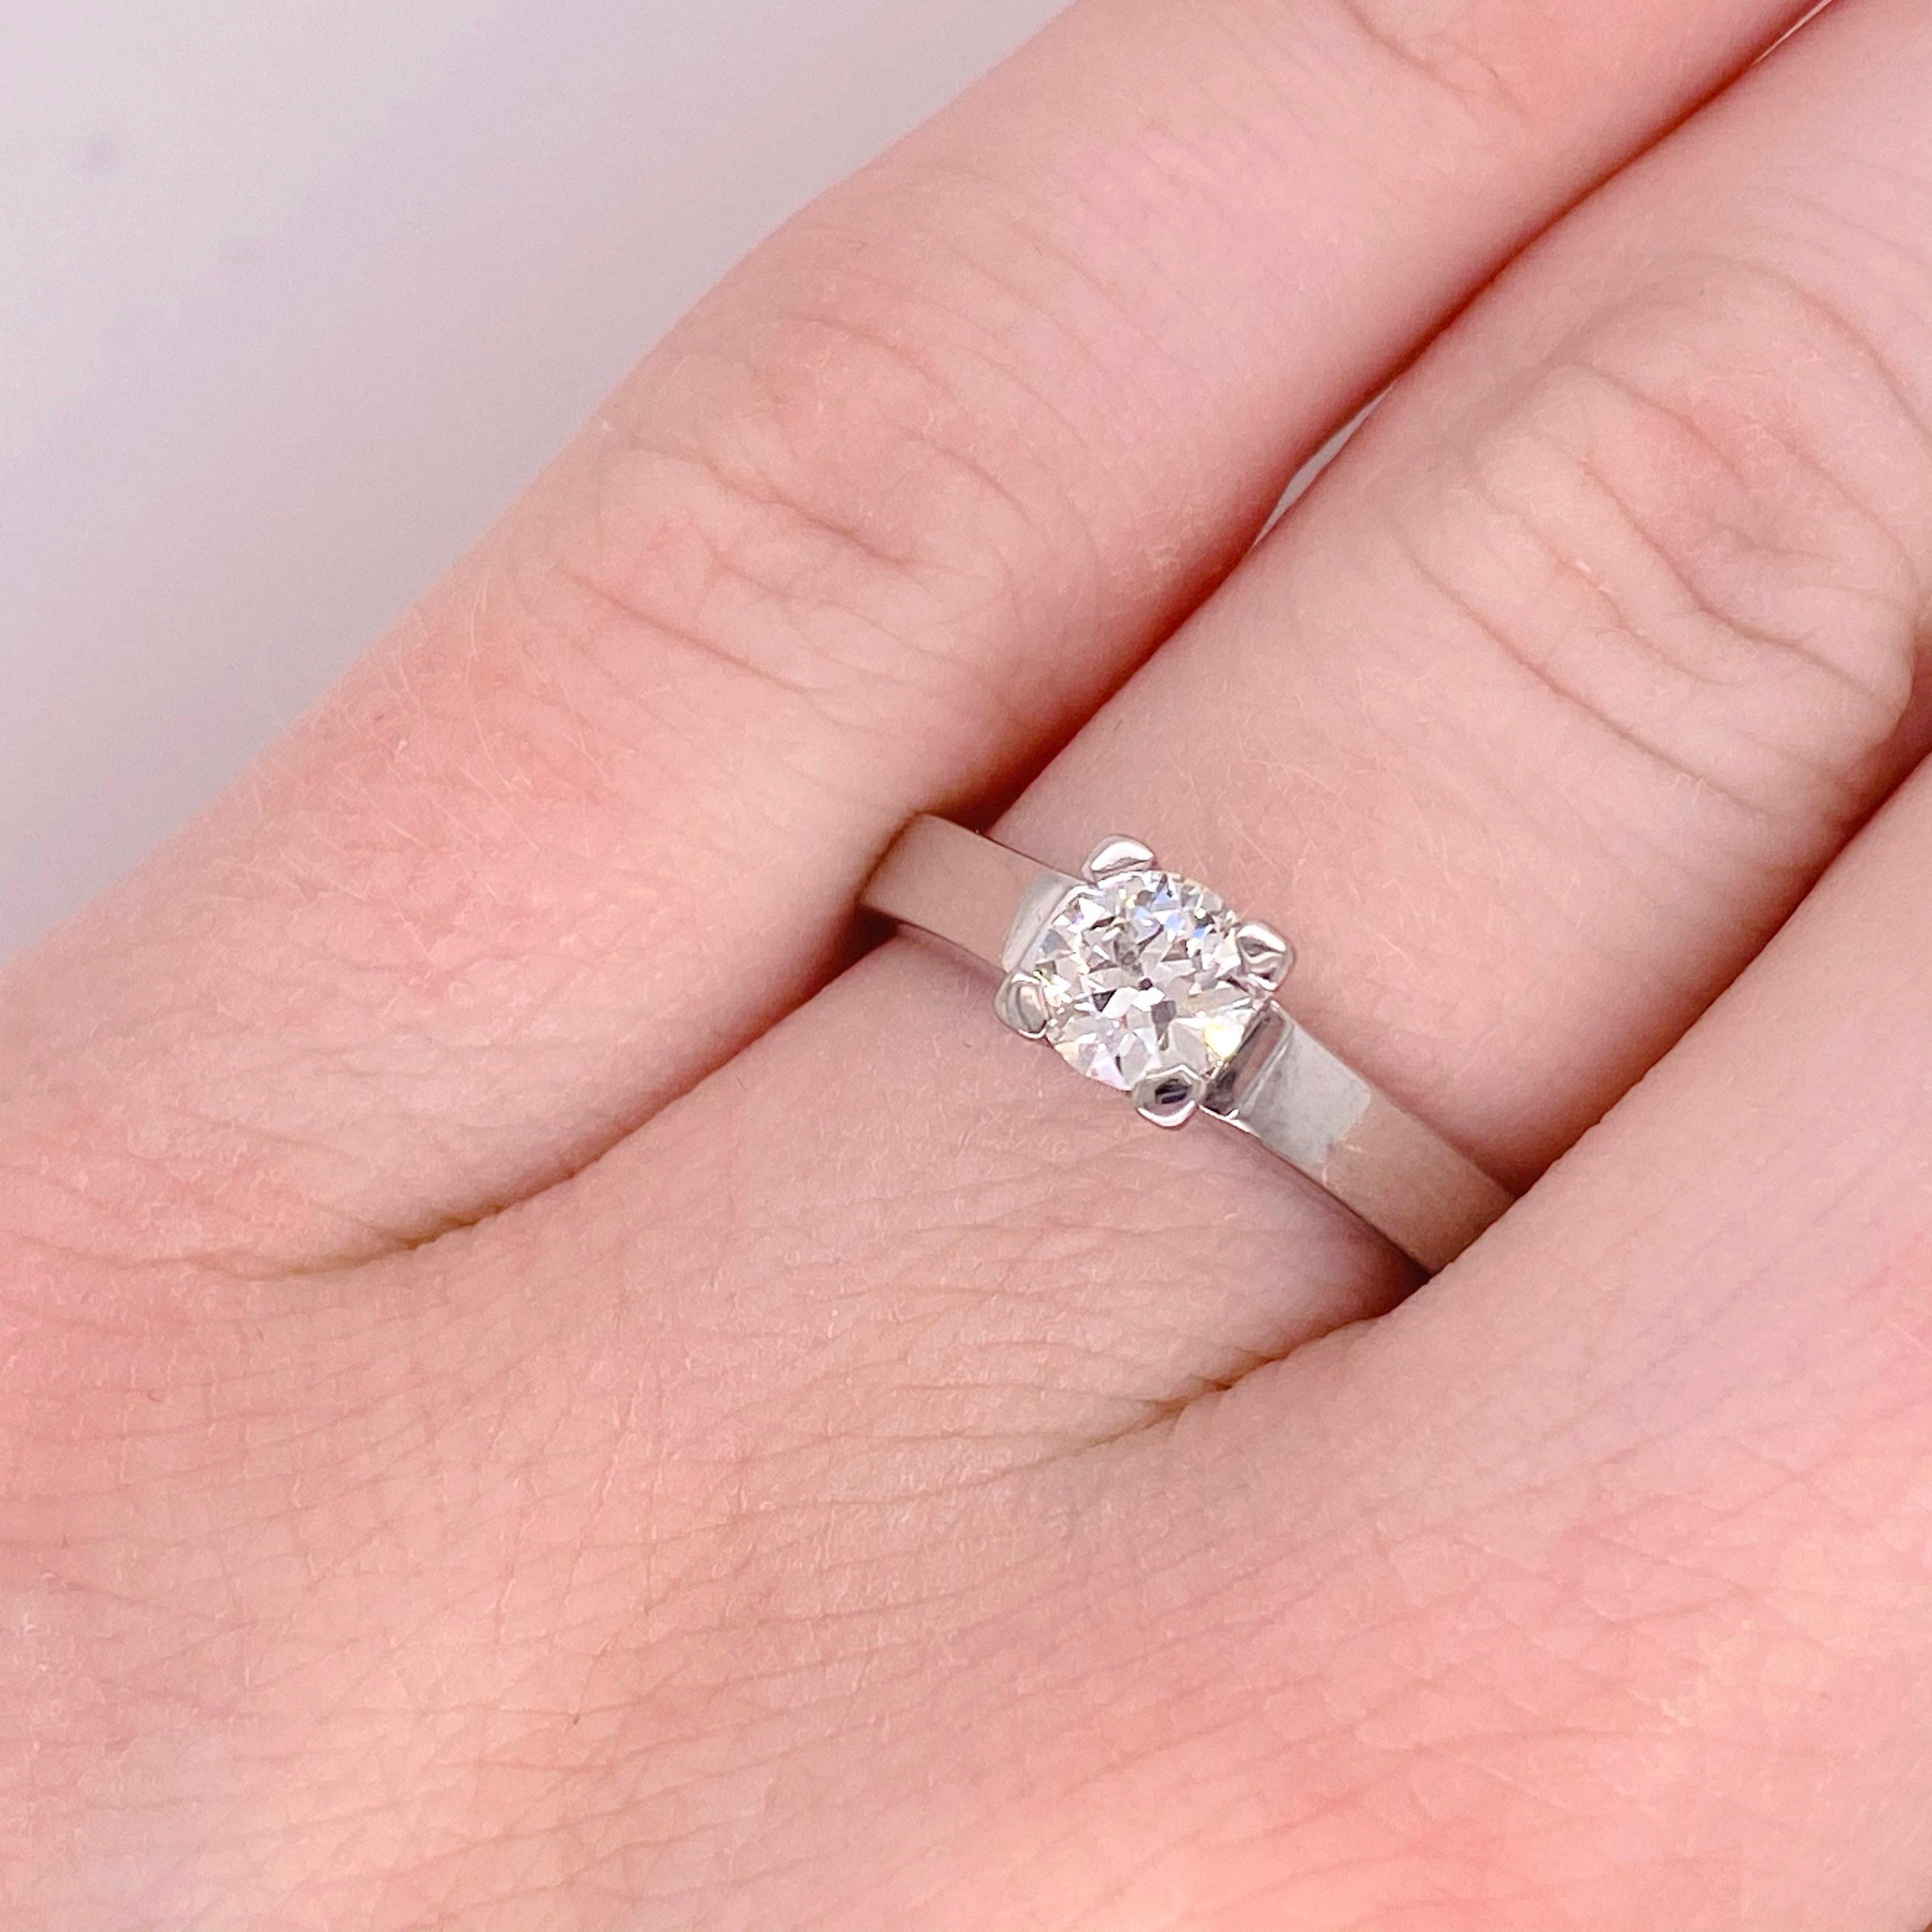 Solitaire Diamond Engagement Ring with Round Brilliant Diamond Center
The solitaire engagement ring is a classic design the focusses on the center diamond. This center diamond is a .58 carat round brilliant diamond that's of amazing quality! The